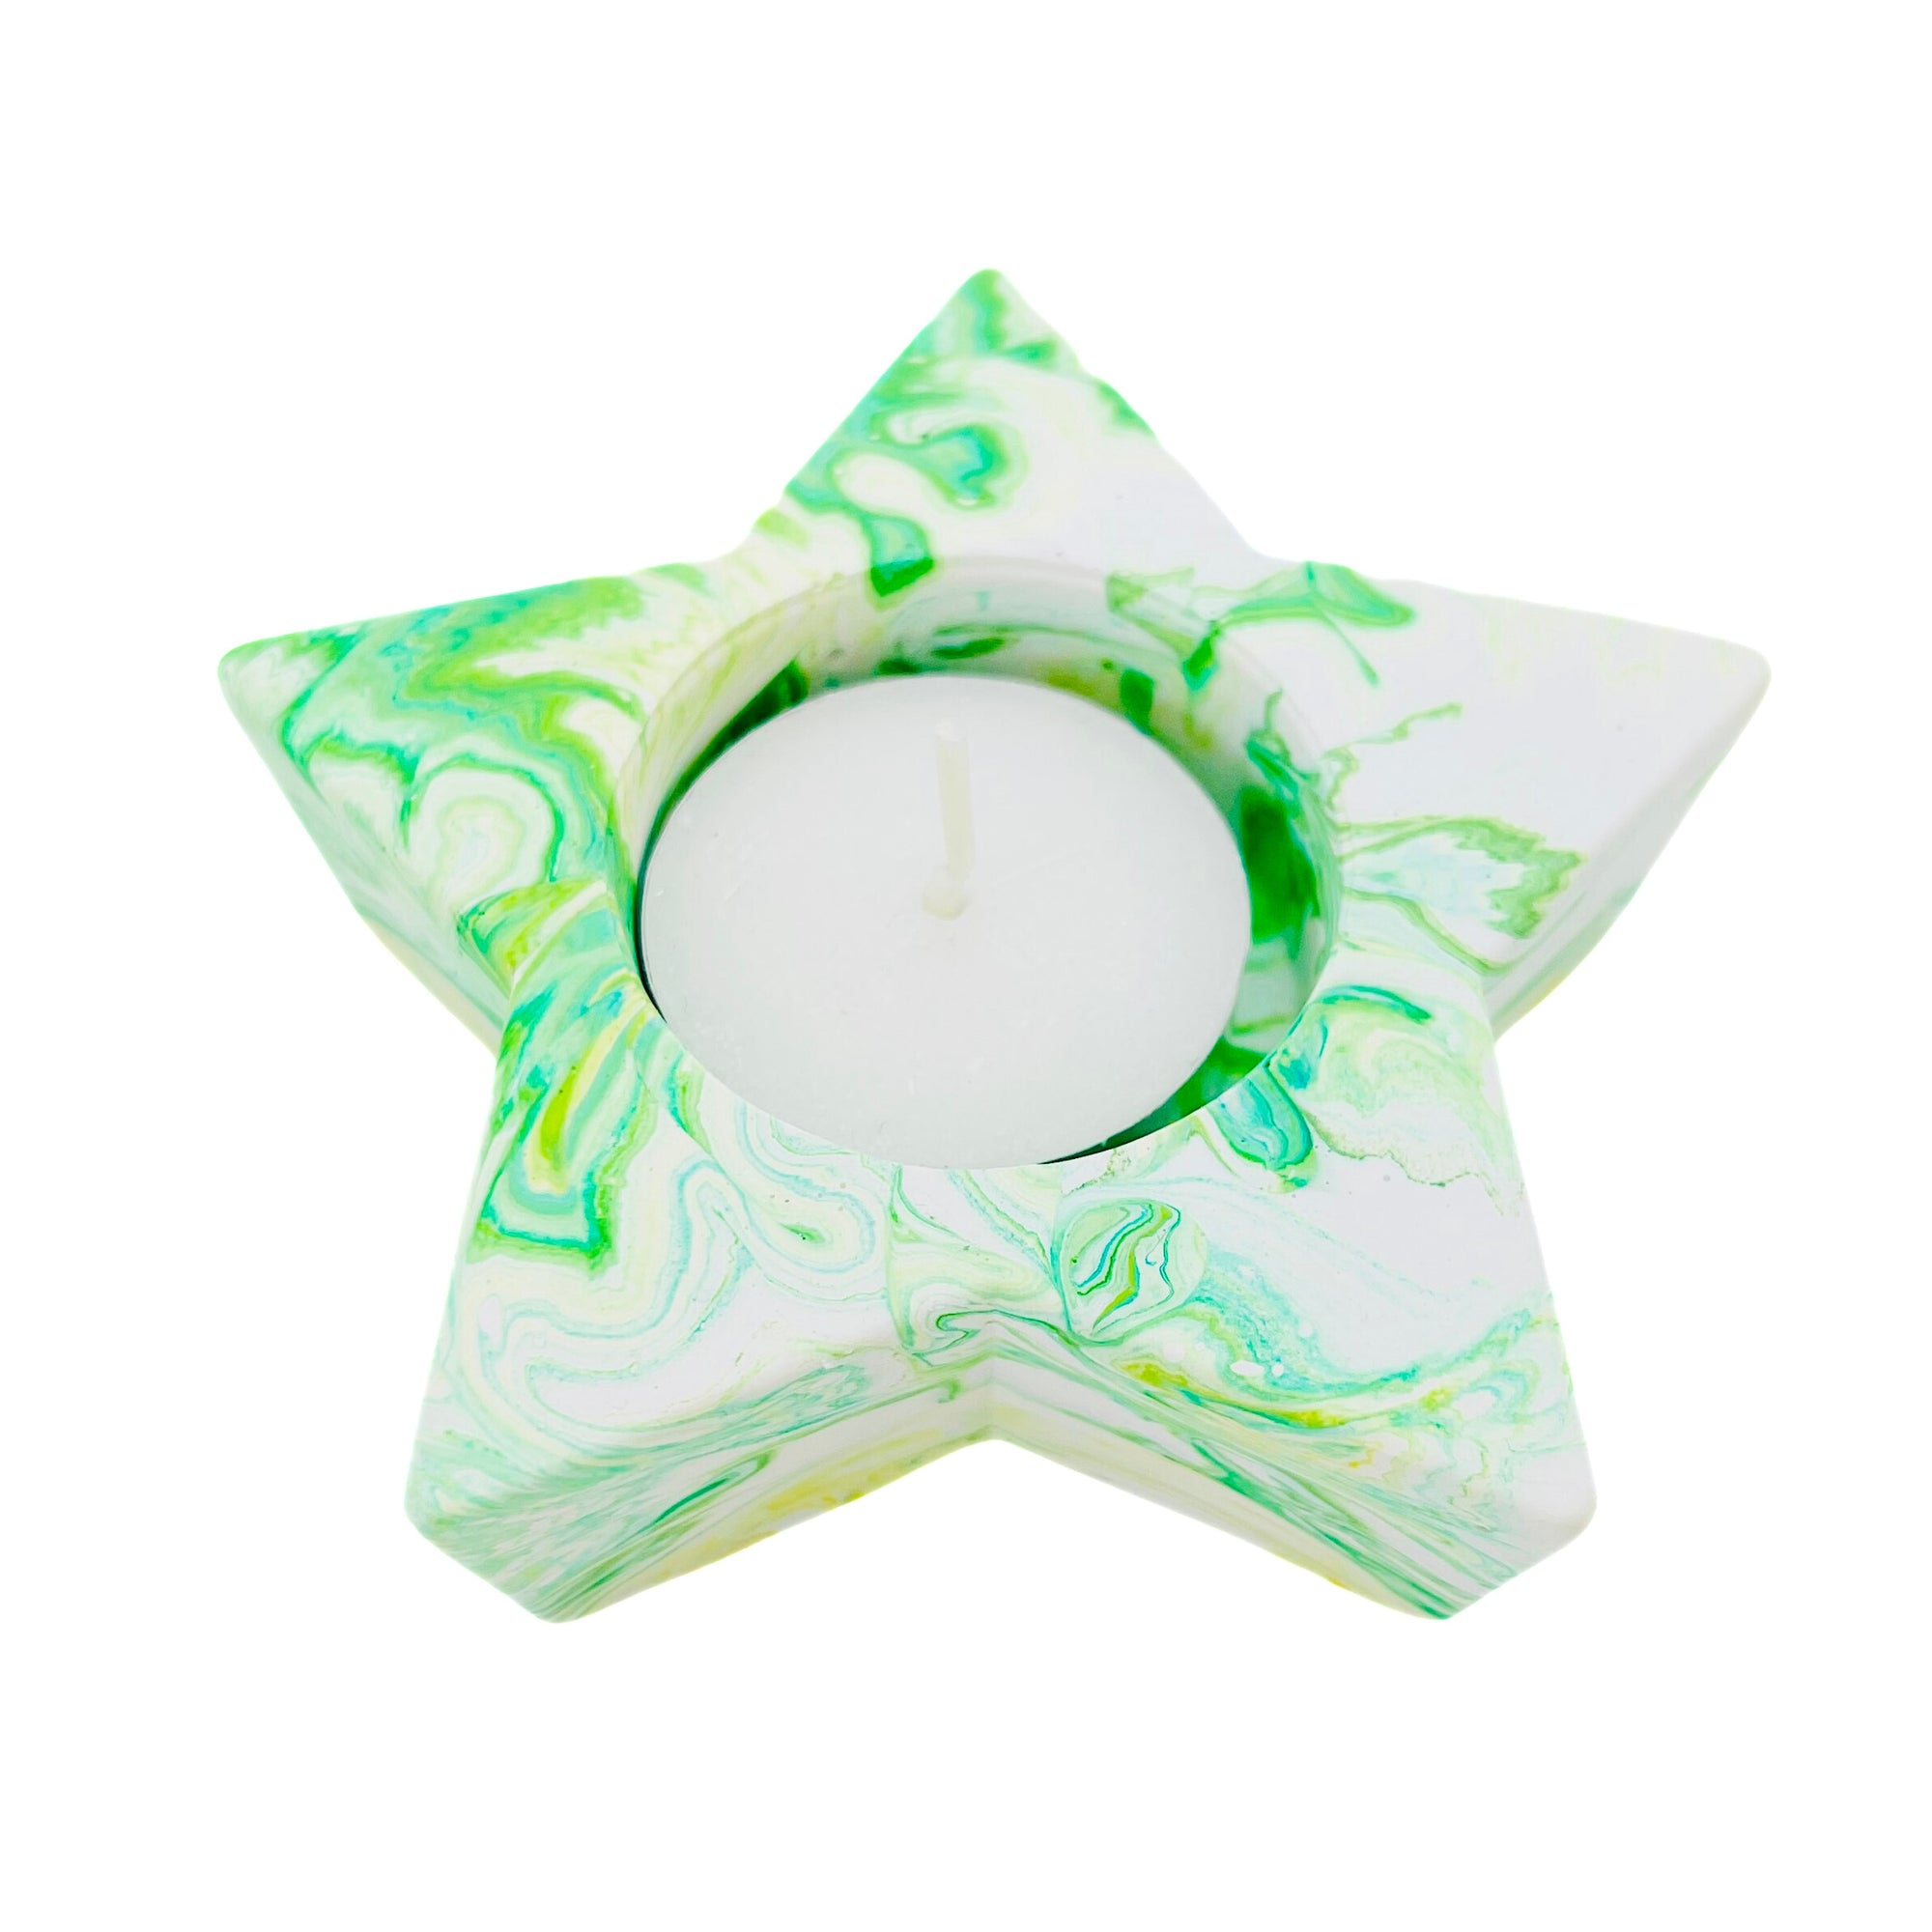 A star shaped Jesmonite tealight holder measuring 10cm in width and marbled with green pigment.